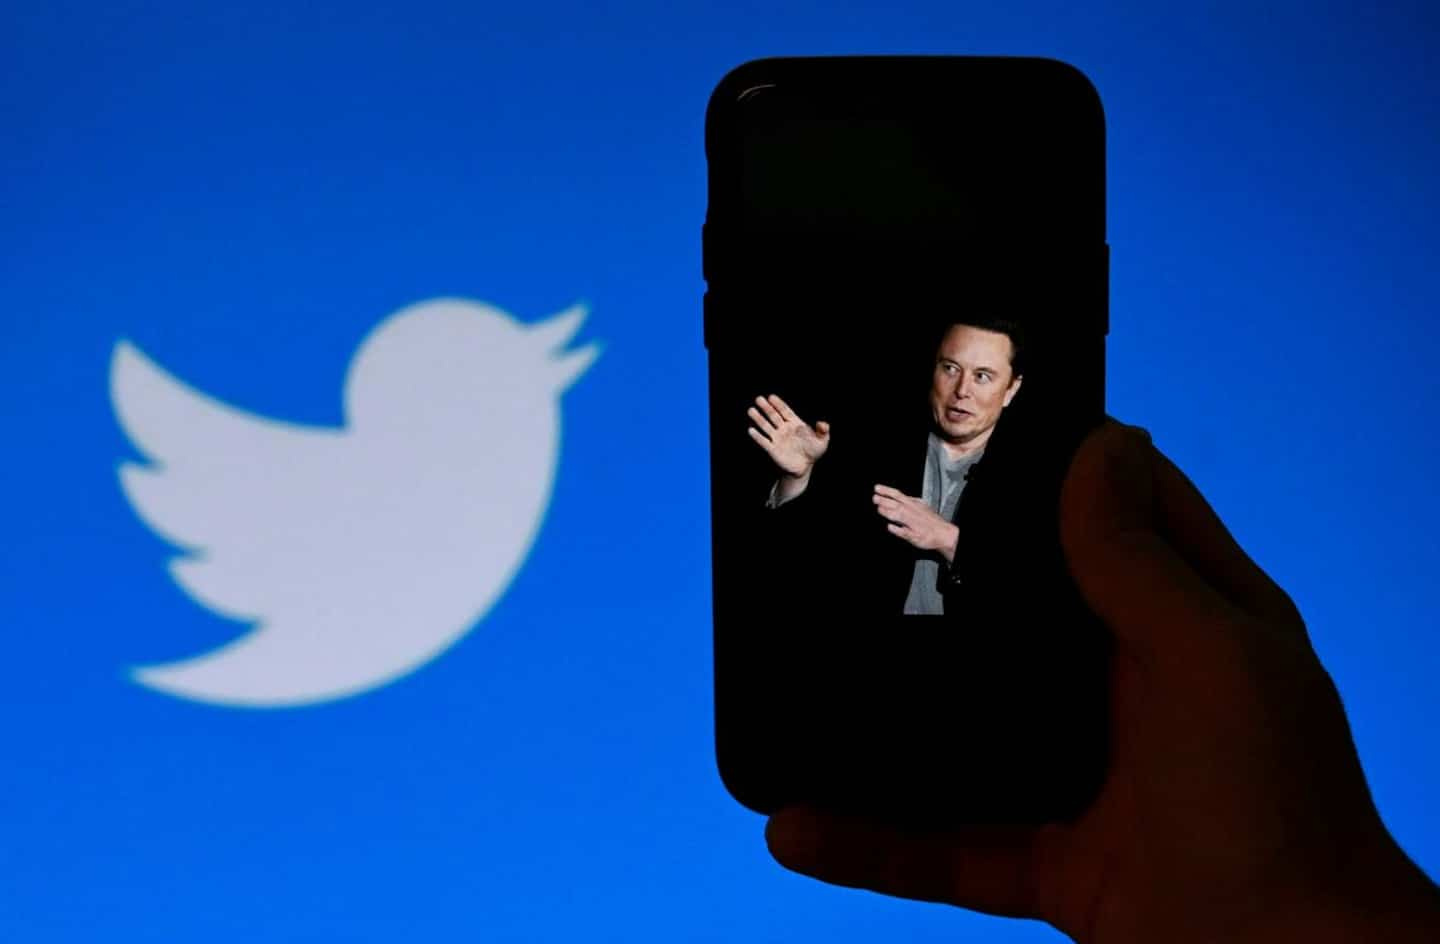 Elon Musk, new owner of Twitter, relays false allegations then deletes his tweet